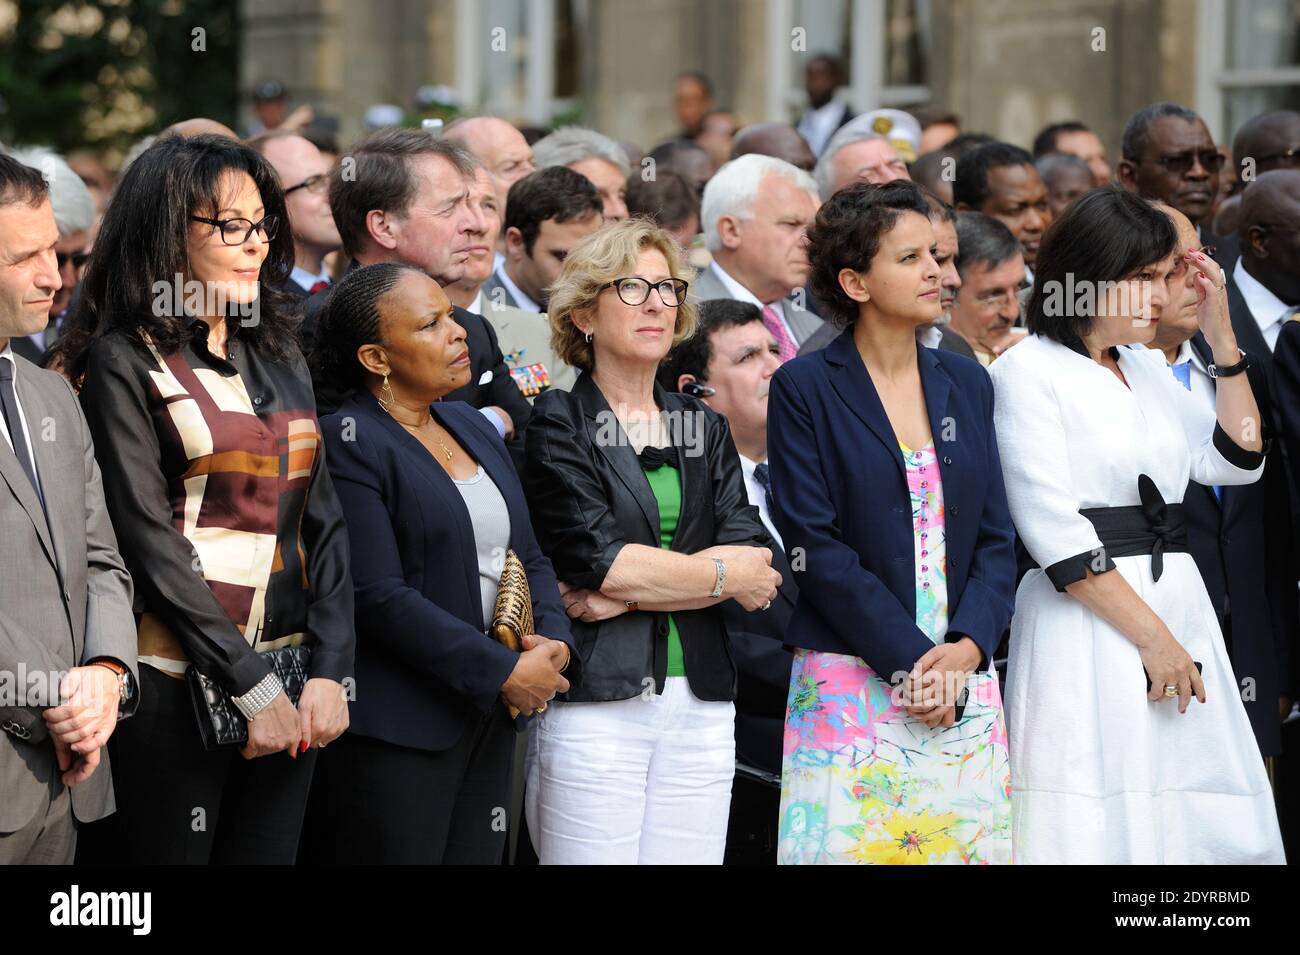 JM for Social and Solidarity Economy, Benoit Hamon, JM for French Living Abroad and Francophony, Yamina Benguigui, Justice Minister Christiane Taubira, Higher Education and Research Minister Genevieve Fioraso, Minister for Women's Rights and Government Spokesperson Najat Vallaud-Belkacem and JM for Disabled People Marie-Arlette Carlotti during a garden party as part of the Bastille Day celebration, at the Defence Ministry in Paris, France on July 13, 2013. Photo by Jacques Witt/Pool/ABACAPRESS.COM Stock Photo